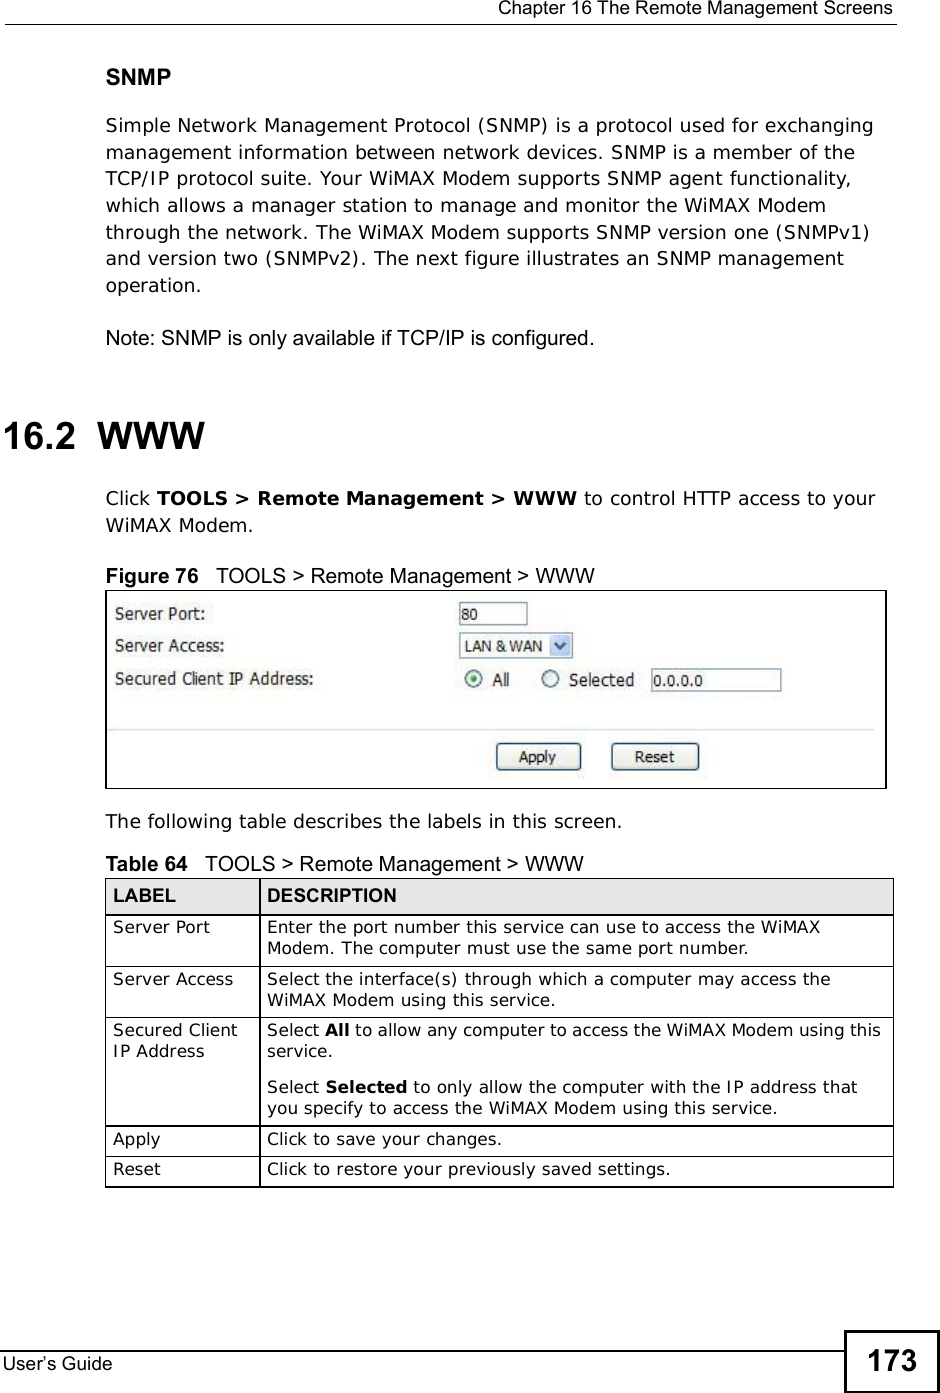  Chapter 16The Remote Management ScreensUser s Guide 173SNMPSimple Network Management Protocol (SNMP) is a protocol used for exchanging management information between network devices. SNMP is a member of the TCP/IP protocol suite. Your WiMAX Modem supports SNMP agent functionality, which allows a manager station to manage and monitor the WiMAX Modem through the network. The WiMAX Modem supports SNMP version one (SNMPv1) and version two (SNMPv2). The next figure illustrates an SNMP management operation.Note: SNMP is only available if TCP/IP is configured.16.2  WWWClick TOOLS &gt; Remote Management &gt; WWW to control HTTP access to your WiMAX Modem.Figure 76   TOOLS &gt; Remote Management &gt; WWWThe following table describes the labels in this screen.       Table 64   TOOLS &gt; Remote Management &gt; WWWLABEL DESCRIPTIONServer Port Enter the port number this service can use to access the WiMAX Modem. The computer must use the same port number.Server Access Select the interface(s) through which a computer may access the WiMAX Modem using this service.Secured Client IP Address Select All to allow any computer to access the WiMAX Modem using this service.Select Selected to only allow the computer with the IP address that you specify to access the WiMAX Modem using this service.Apply Click to save your changes.Reset Click to restore your previously saved settings.